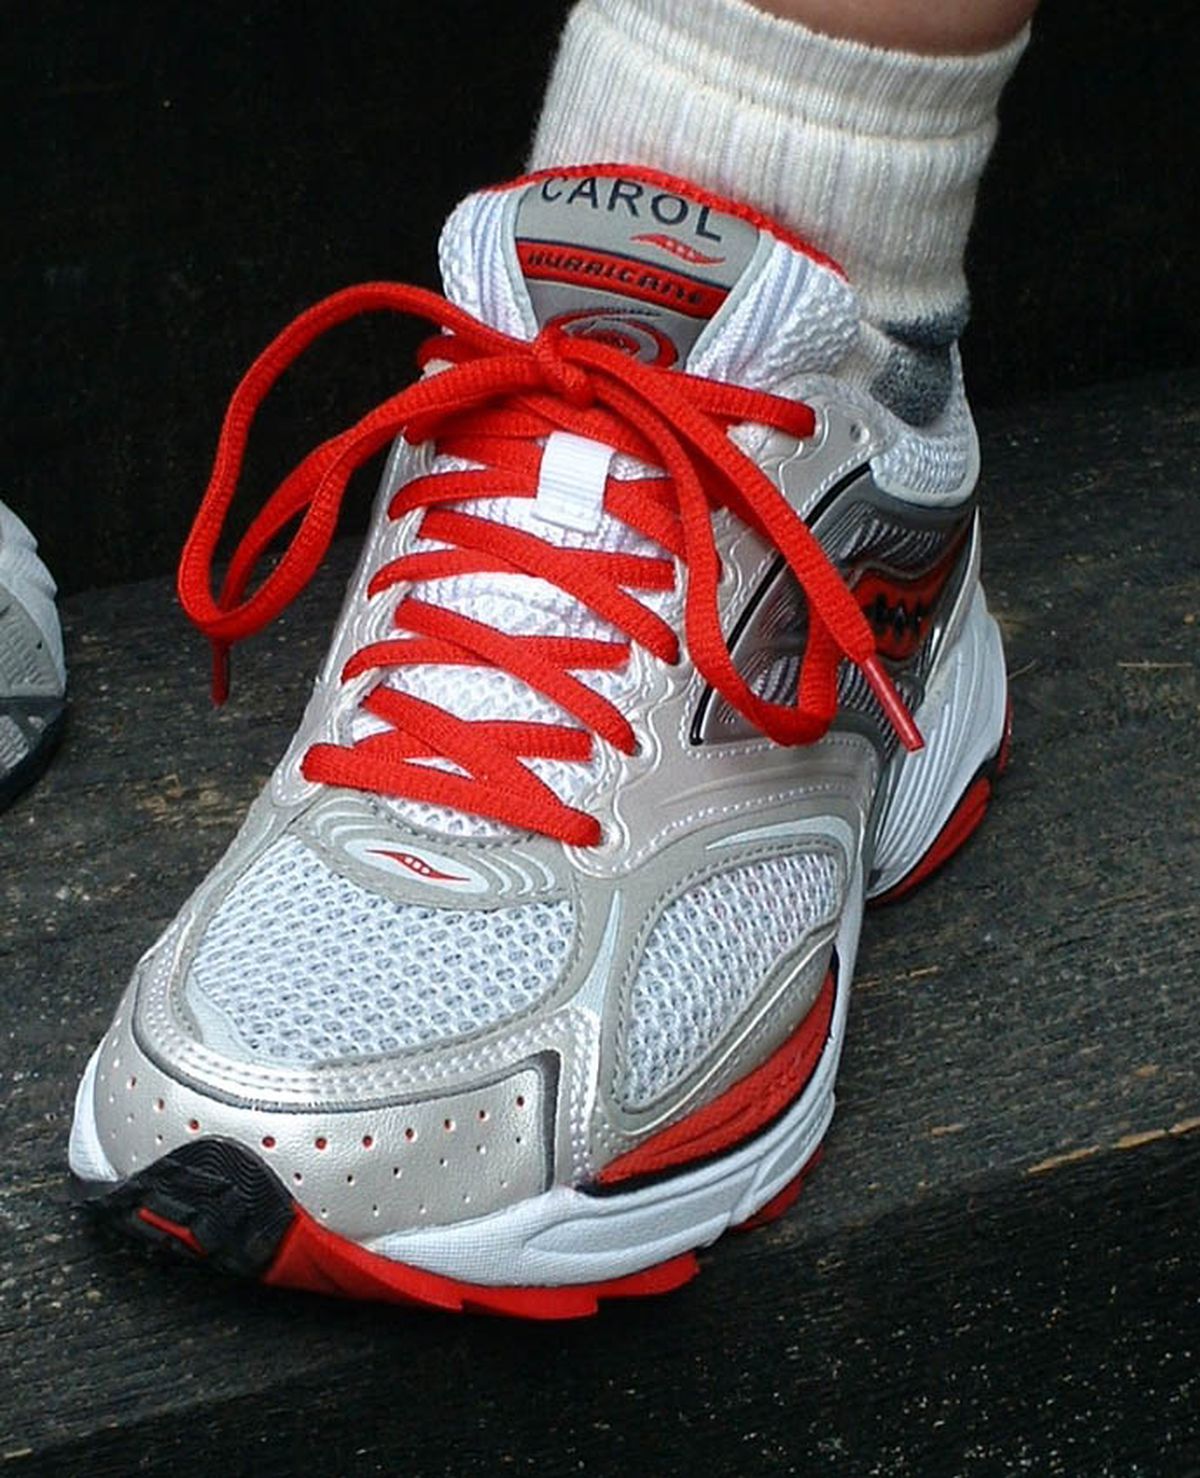 The Carol Hurricane 200 shoe by Saucony was created in honor of Dellinger’s 200th marathon. (The Spokesman-Review)